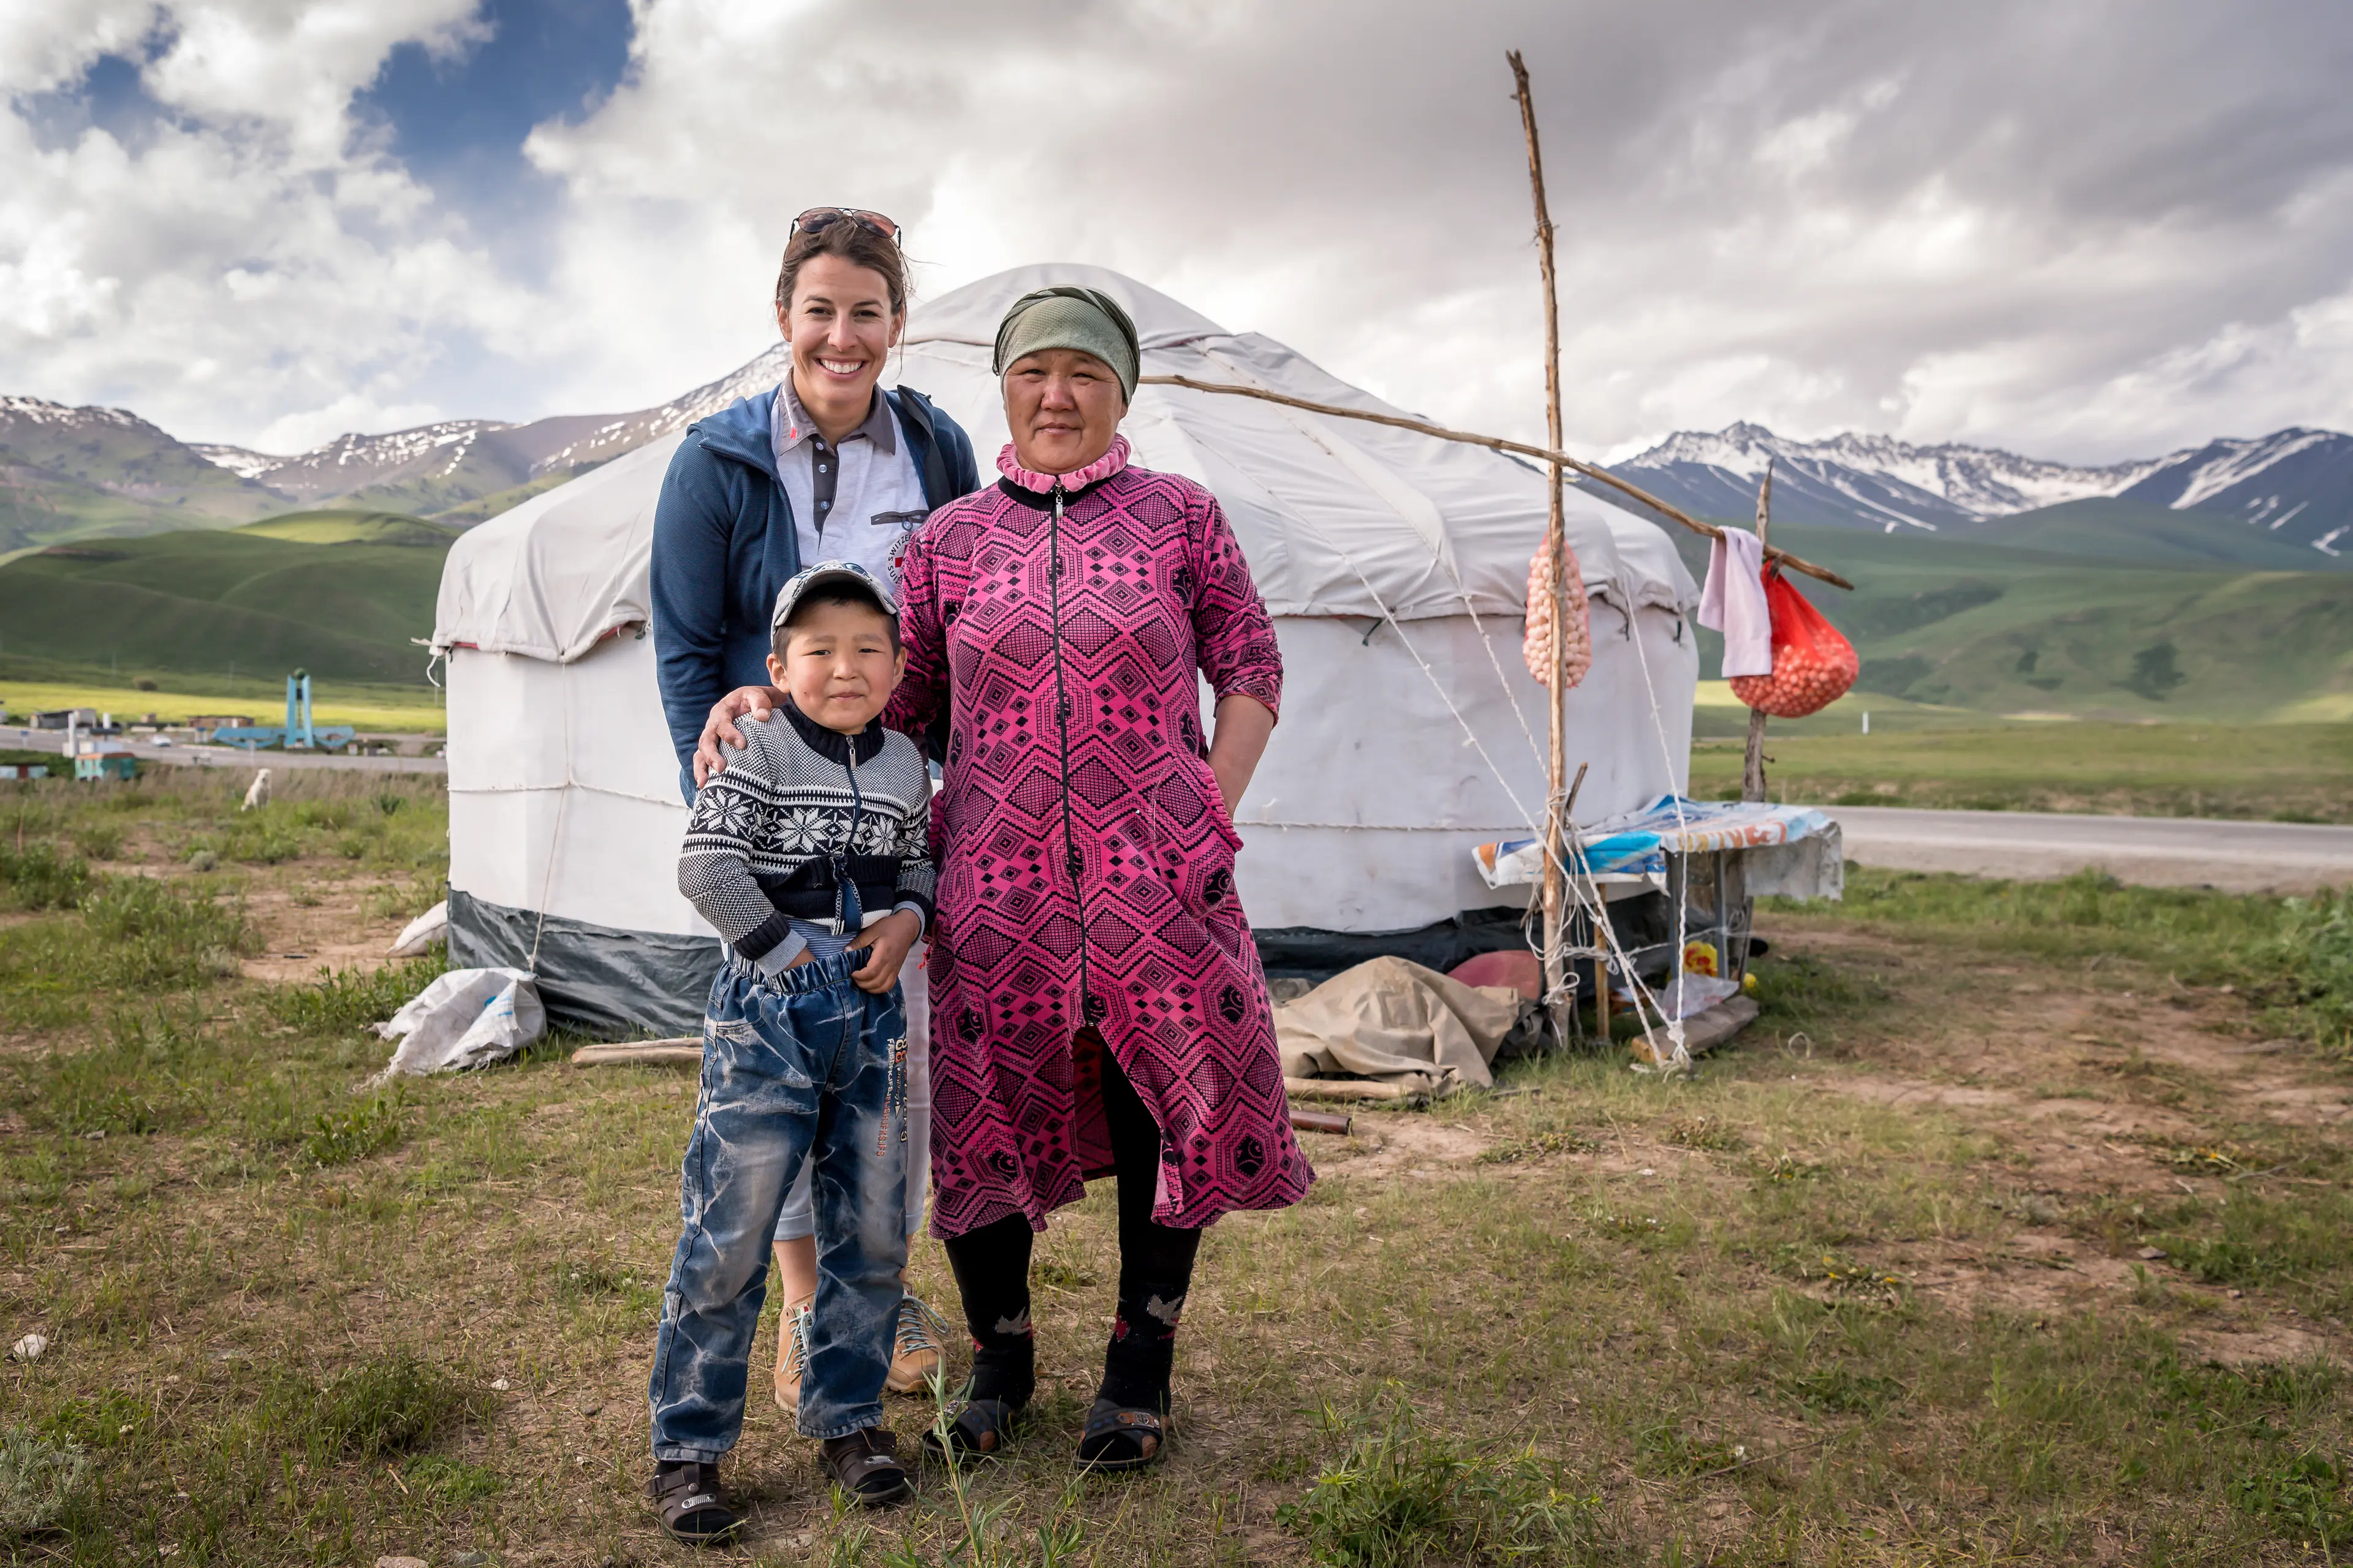 Dominique Gisin with mother and child of the shepherd family in front of a yurt.